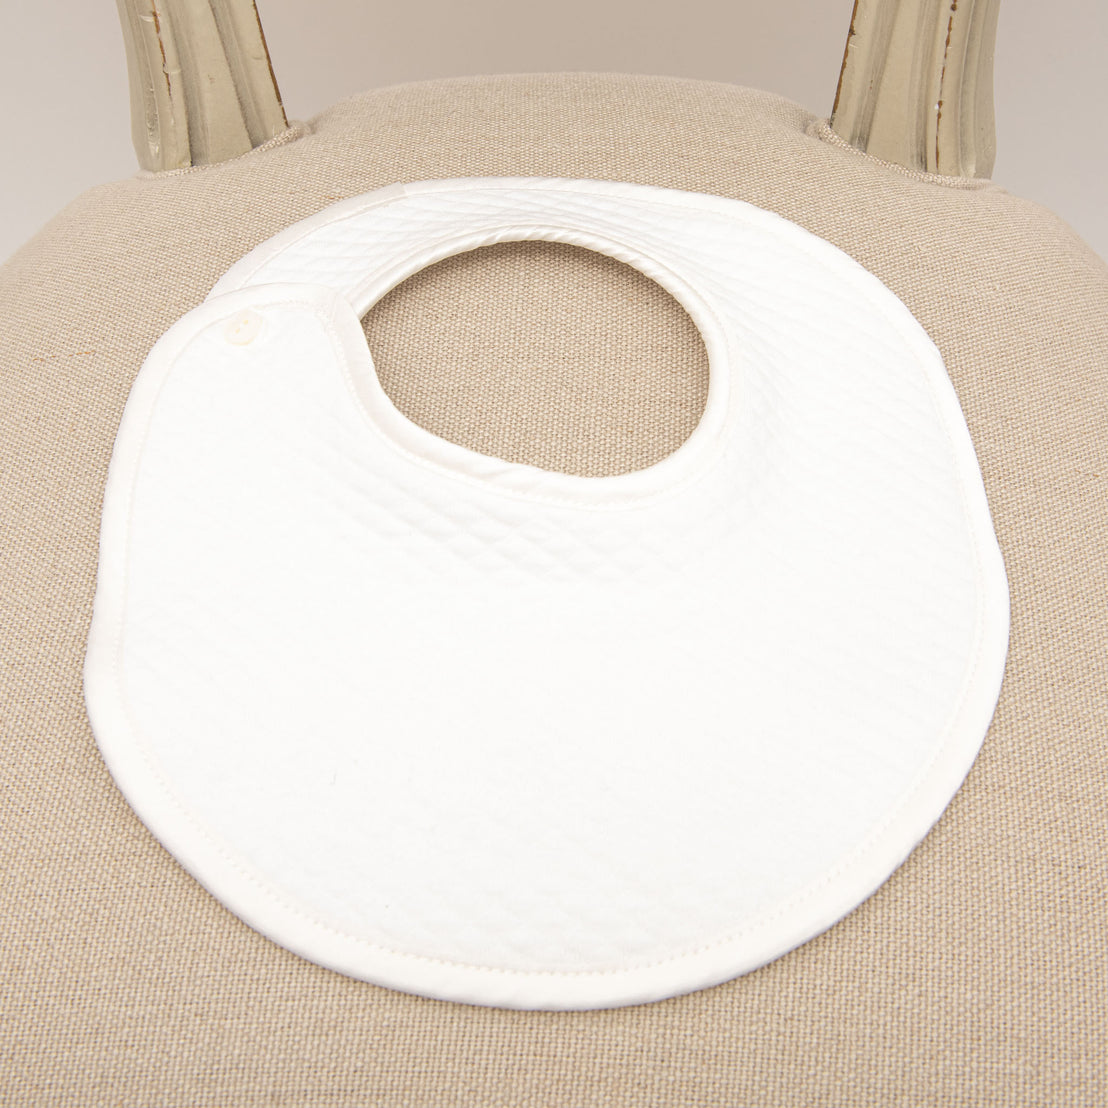 Flat lay photo of the James Bib made from 100% white quilted cotton with button closure and silk piping on the edge.